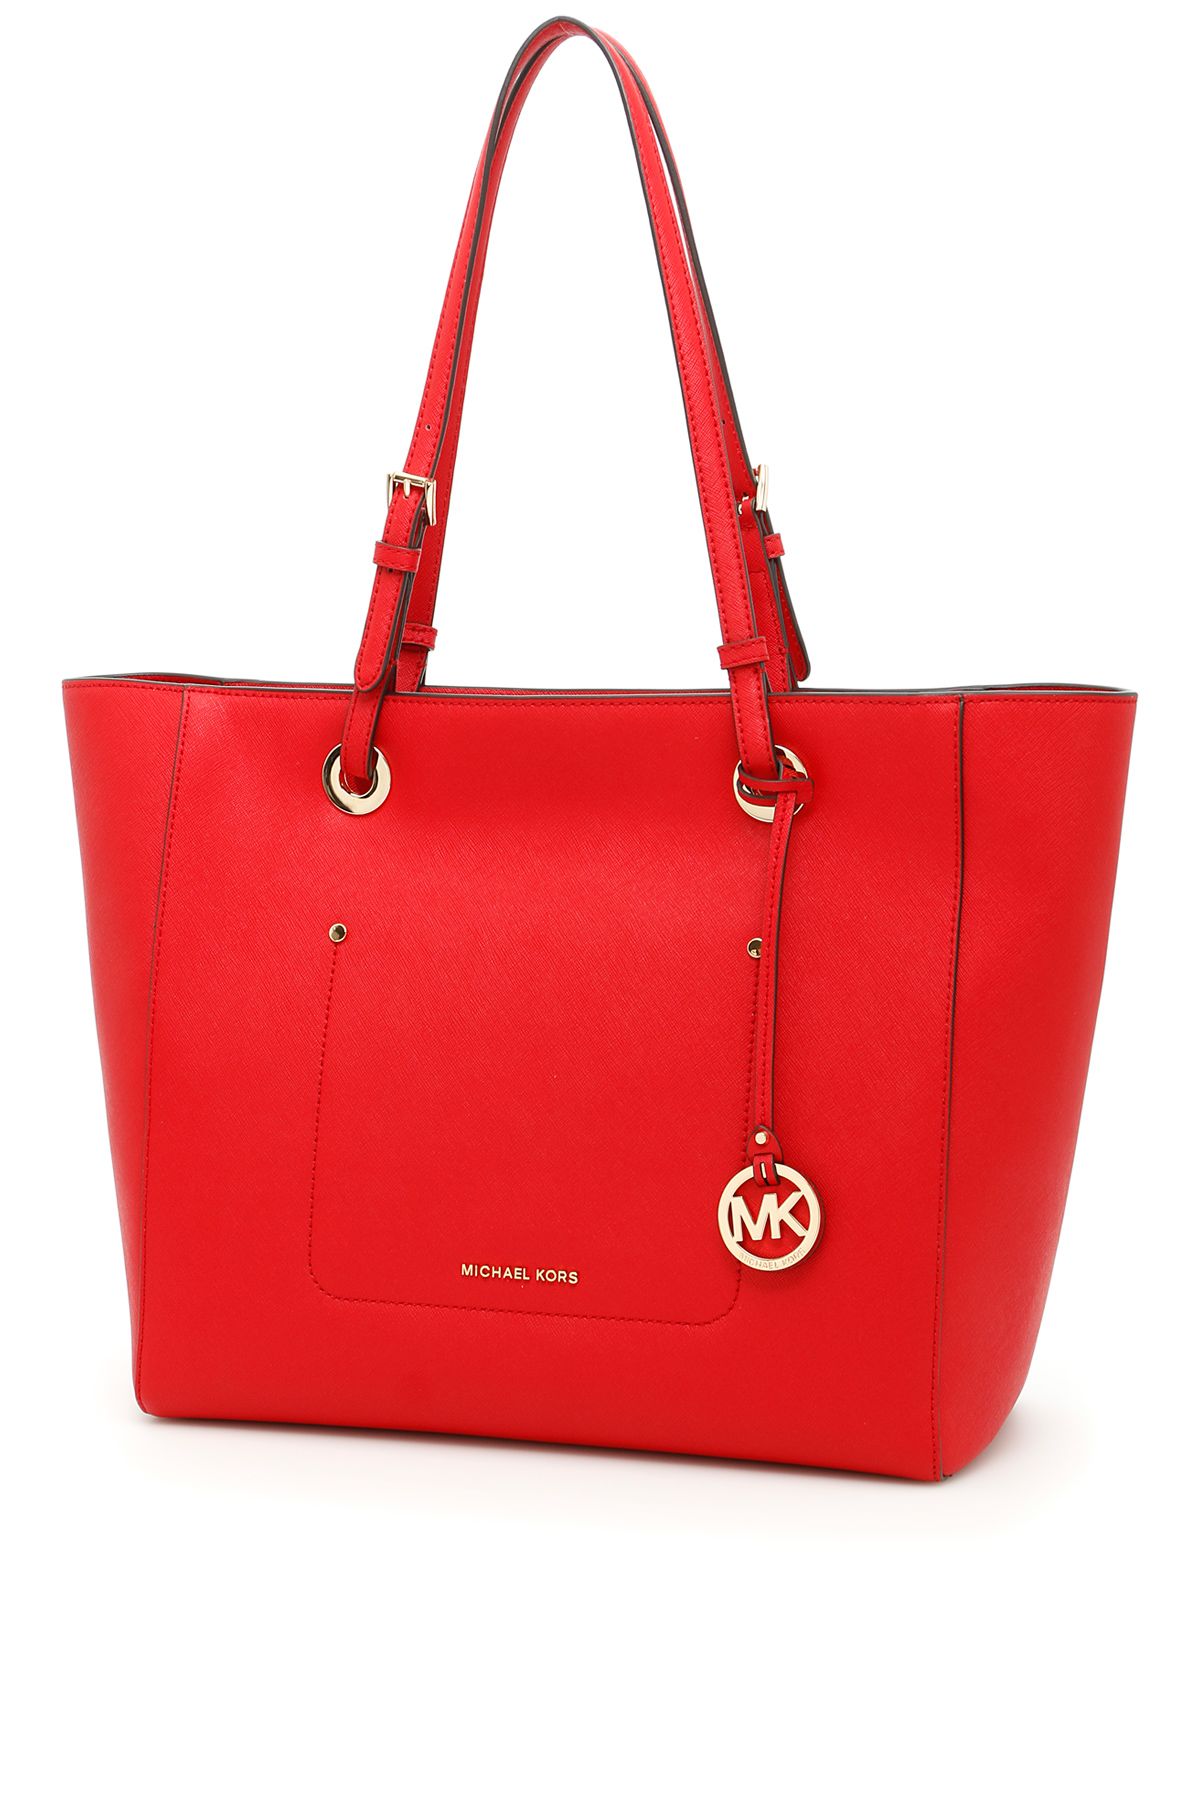 MICHAEL MICHAEL KORS Walsh Large Shopping Bag in Bright Redrosso | ModeSens